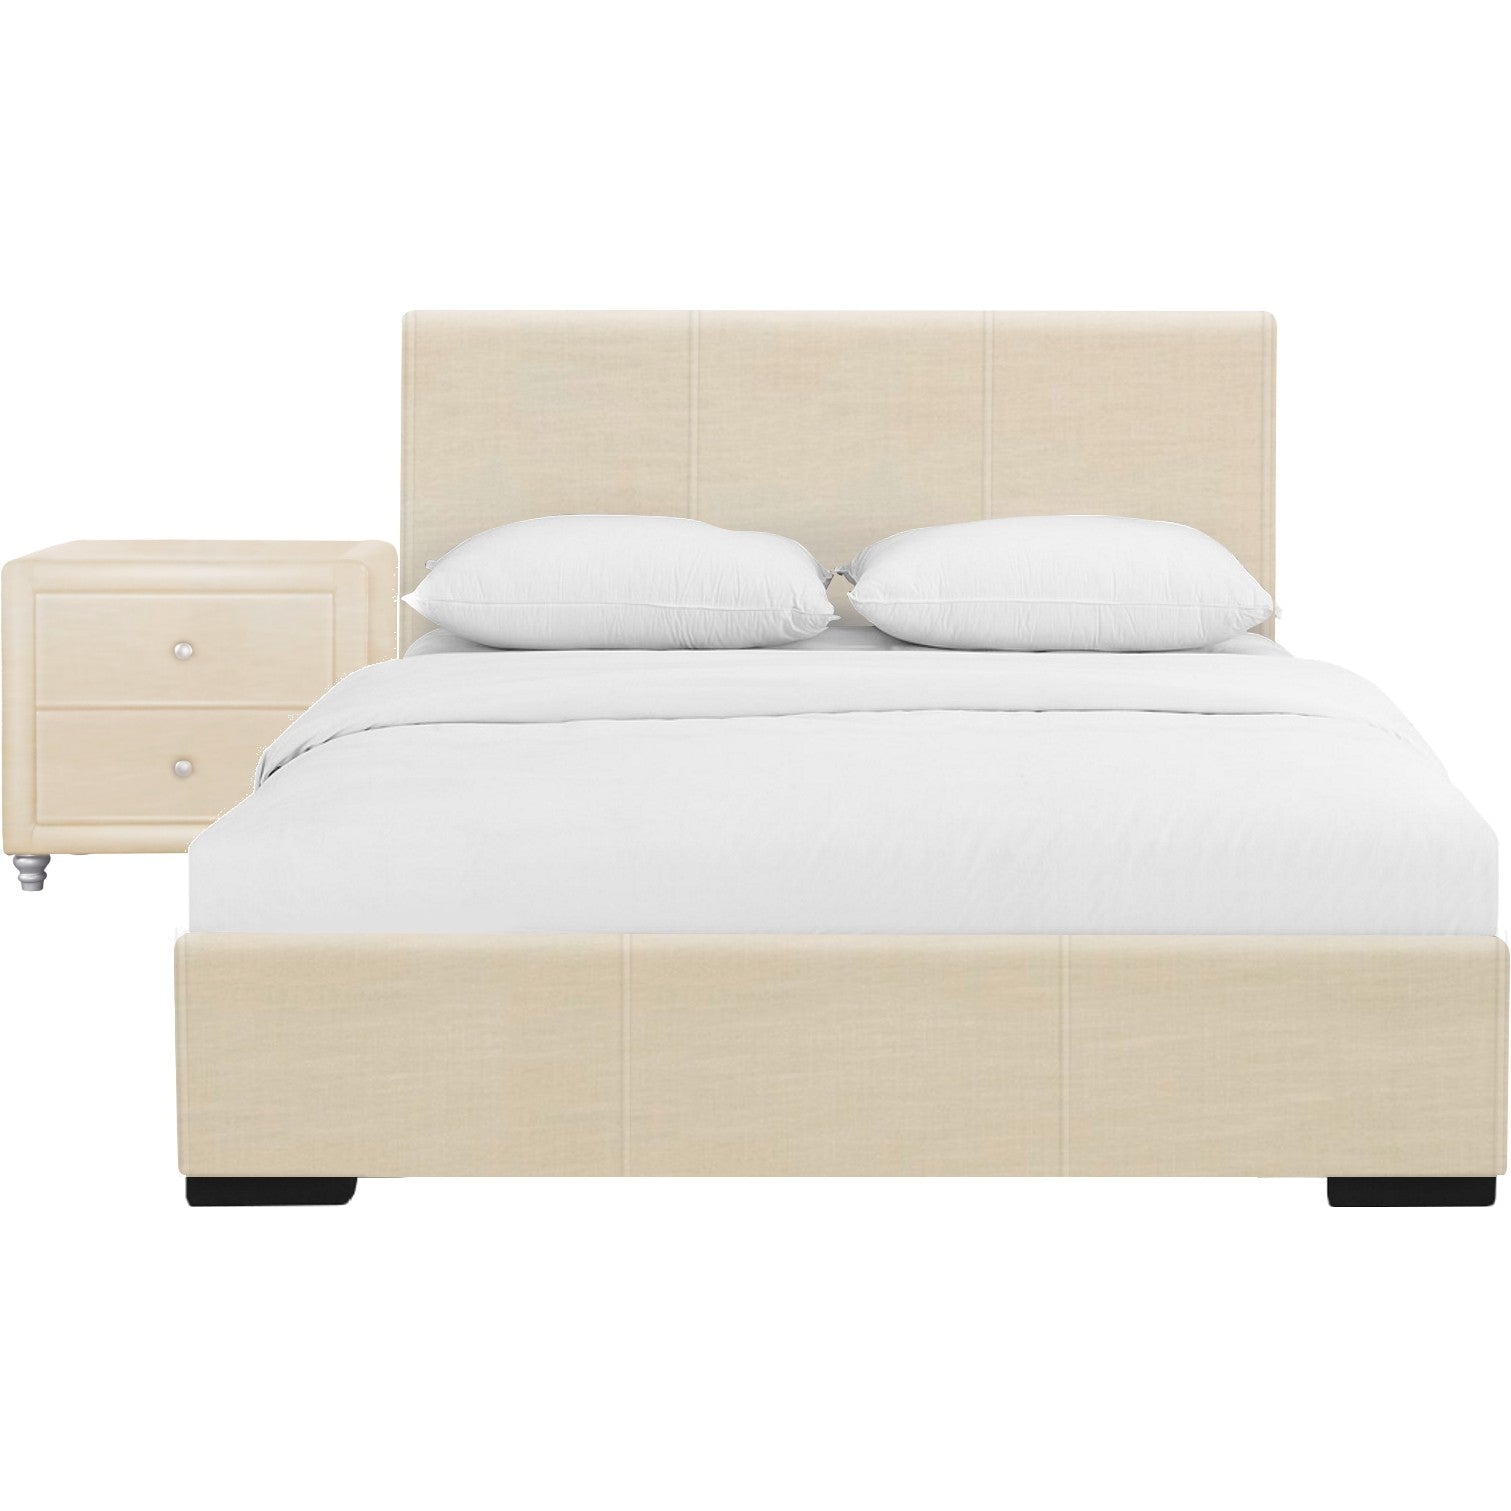 Solid Wood Beige Standard Bed Upholstered With Headboard